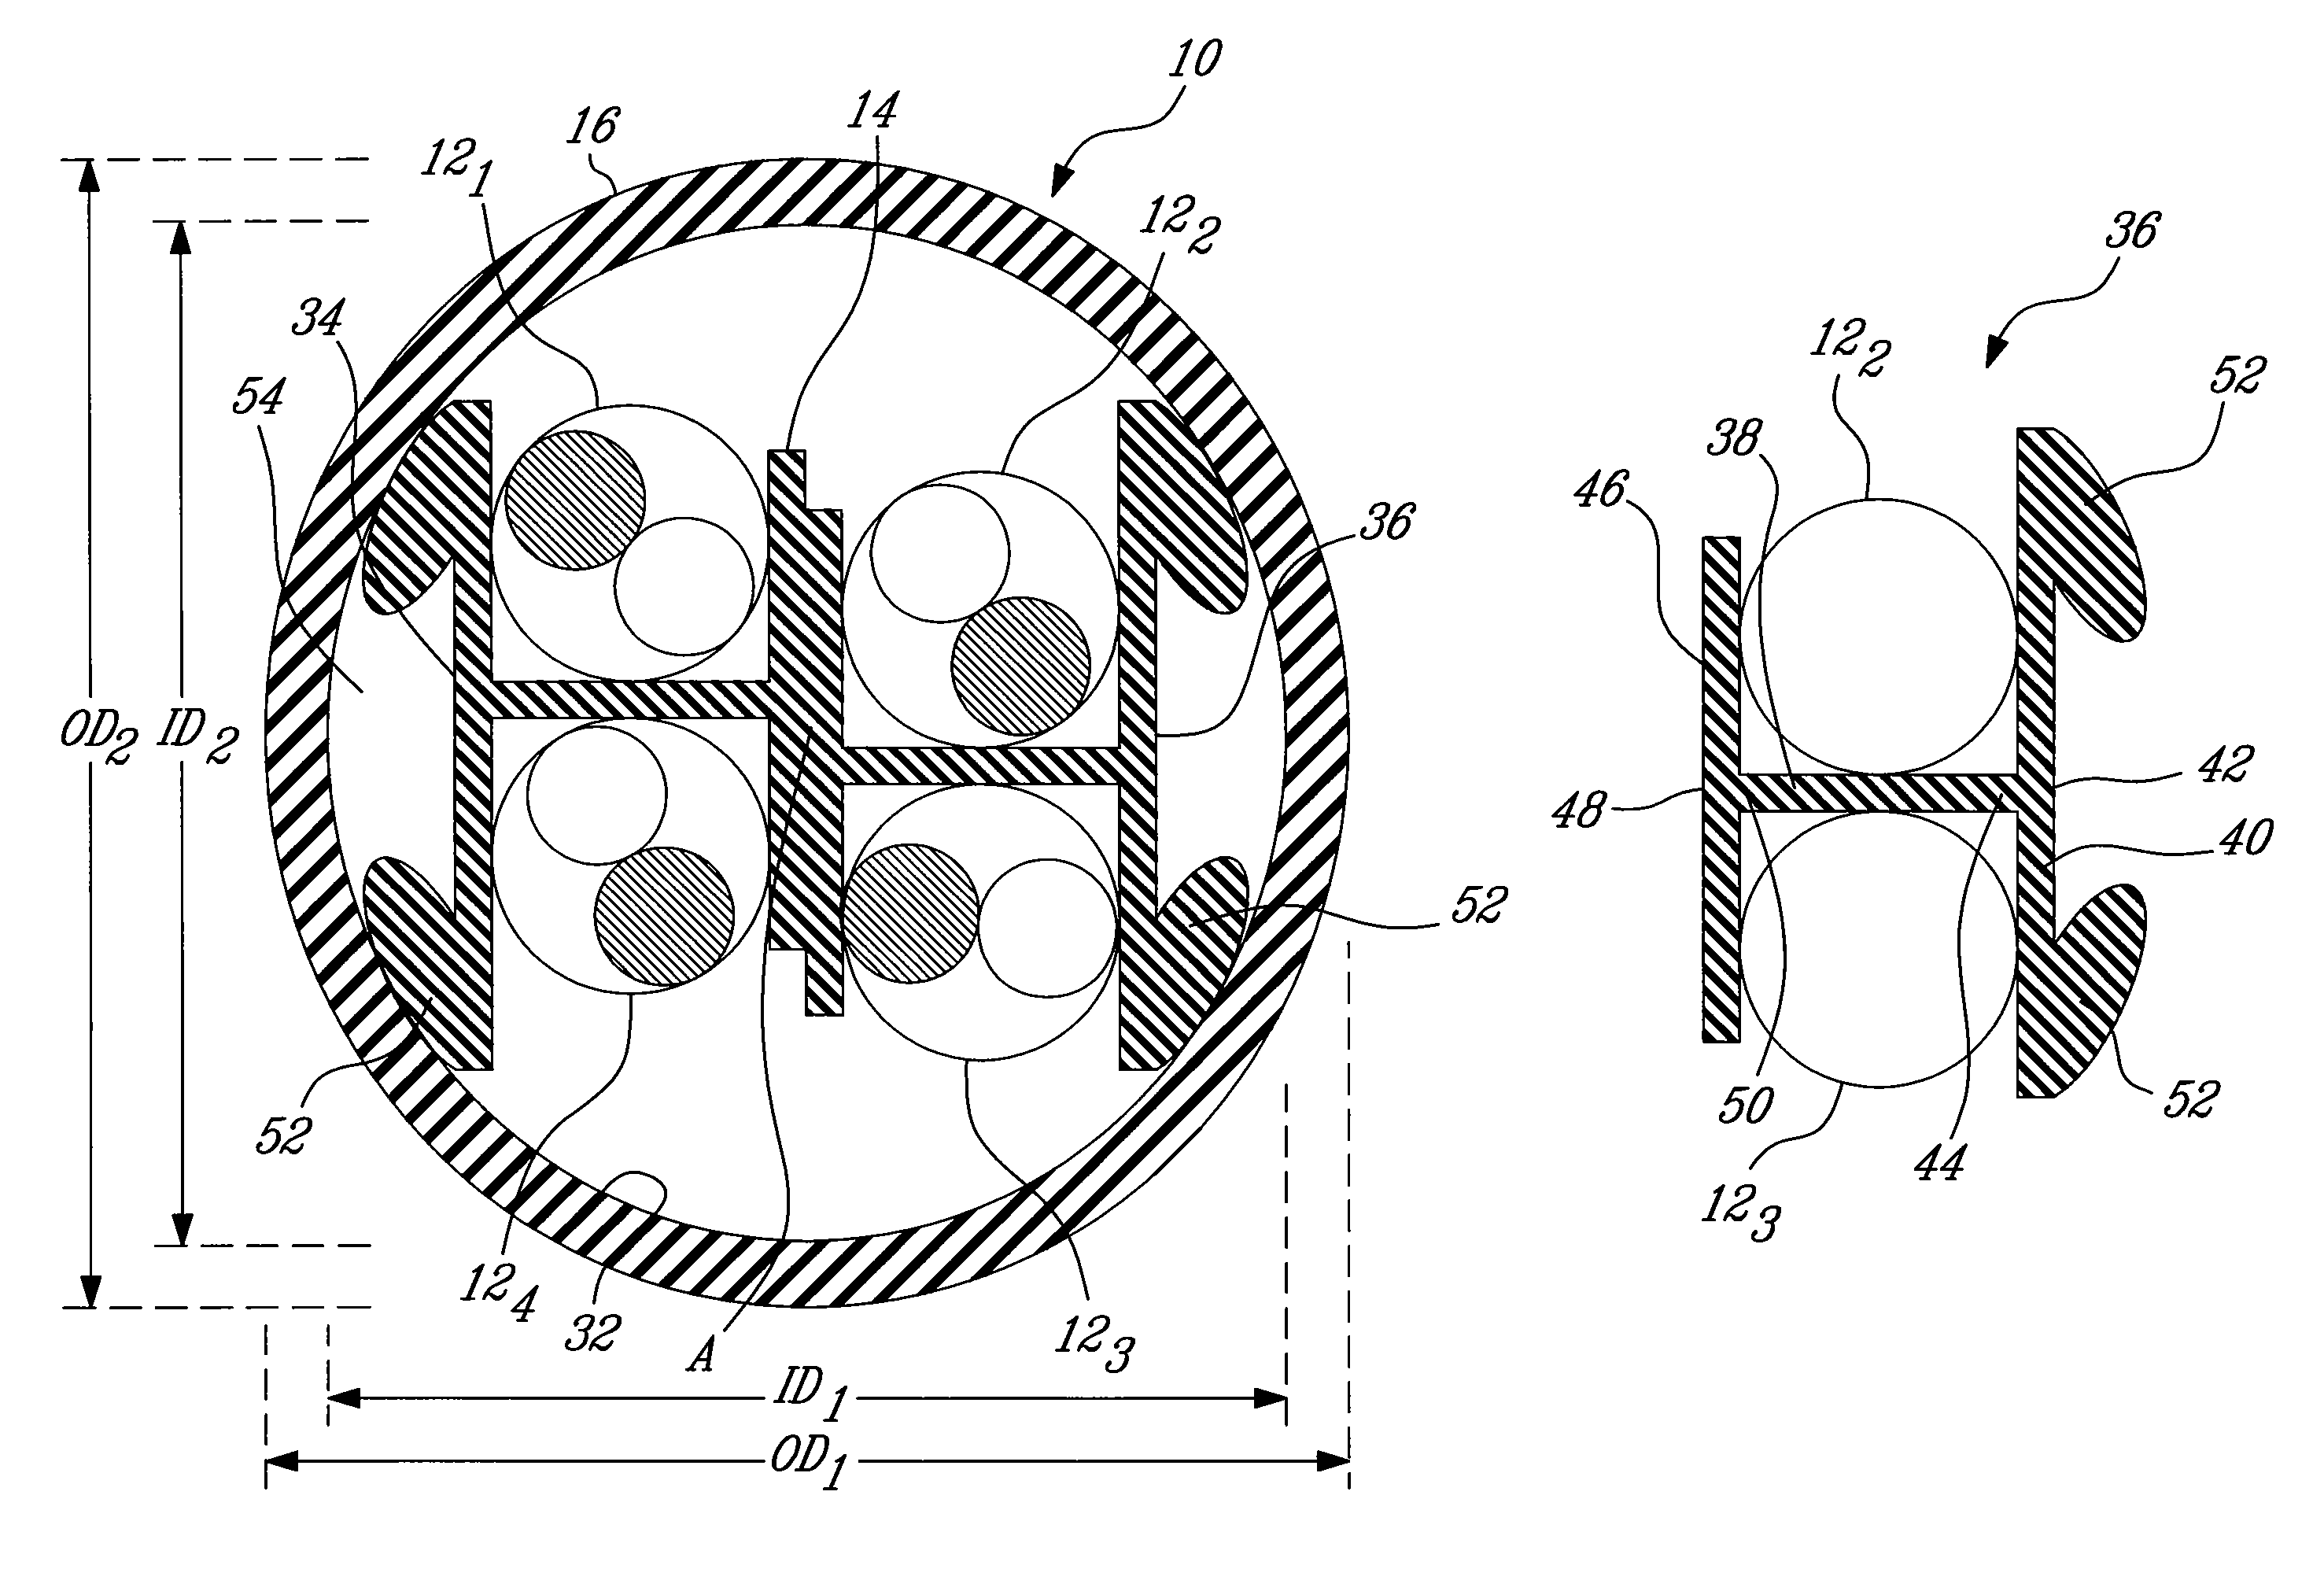 Web for separating conductors in a communication cable